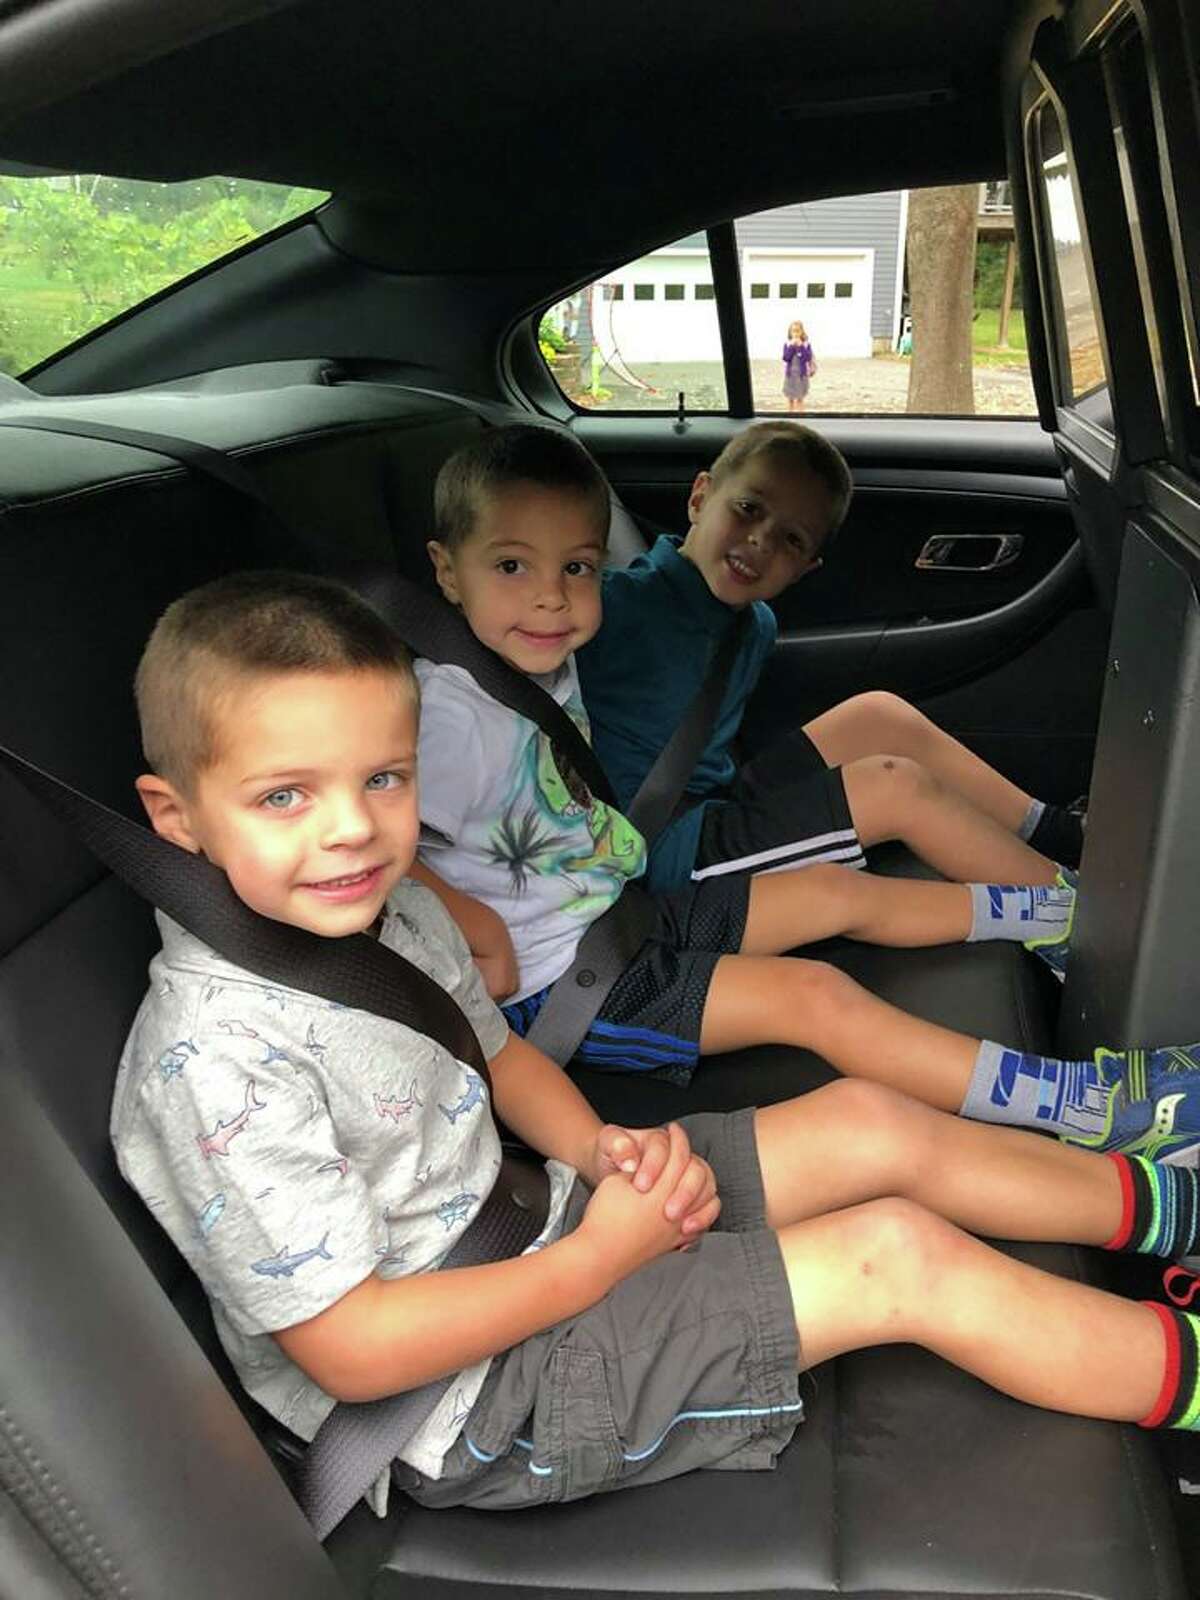 Veterans Park Elementary School students Charlie,Thomas and Henry Cannone won a ride to school with Ridgefield police officer Mark Giglio at the department’s annual Cones and Cops event at Deborah Ann's Sweet Shoppe earlier this fall.